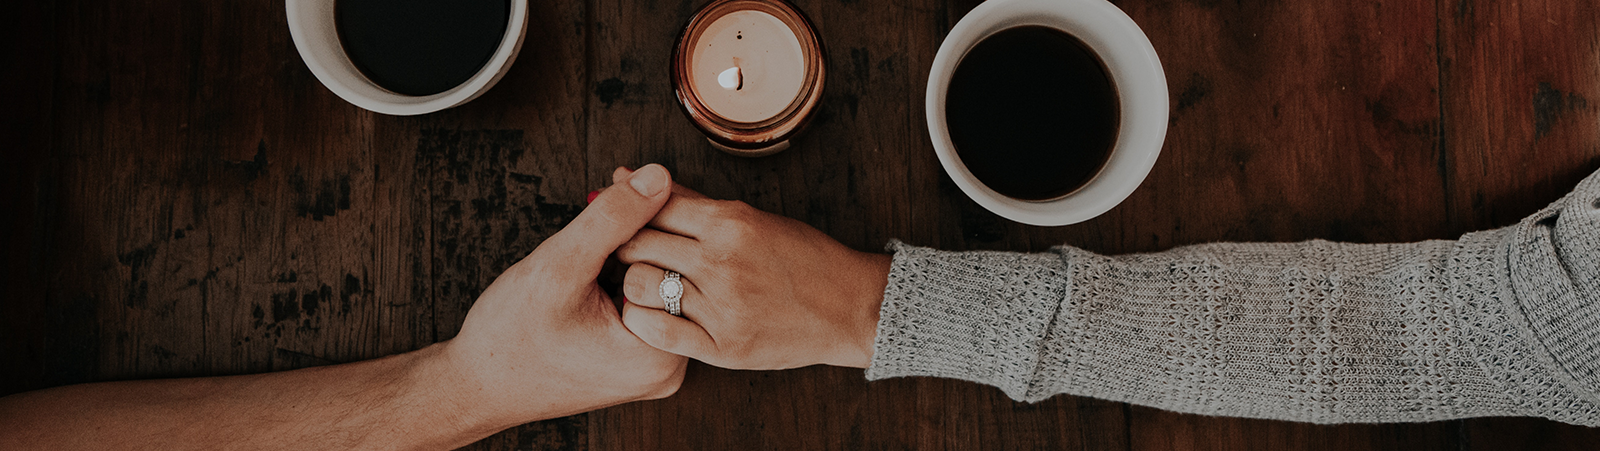 Marriage Counseling in Bensalem, PA—Licensed Counselors and Therapists